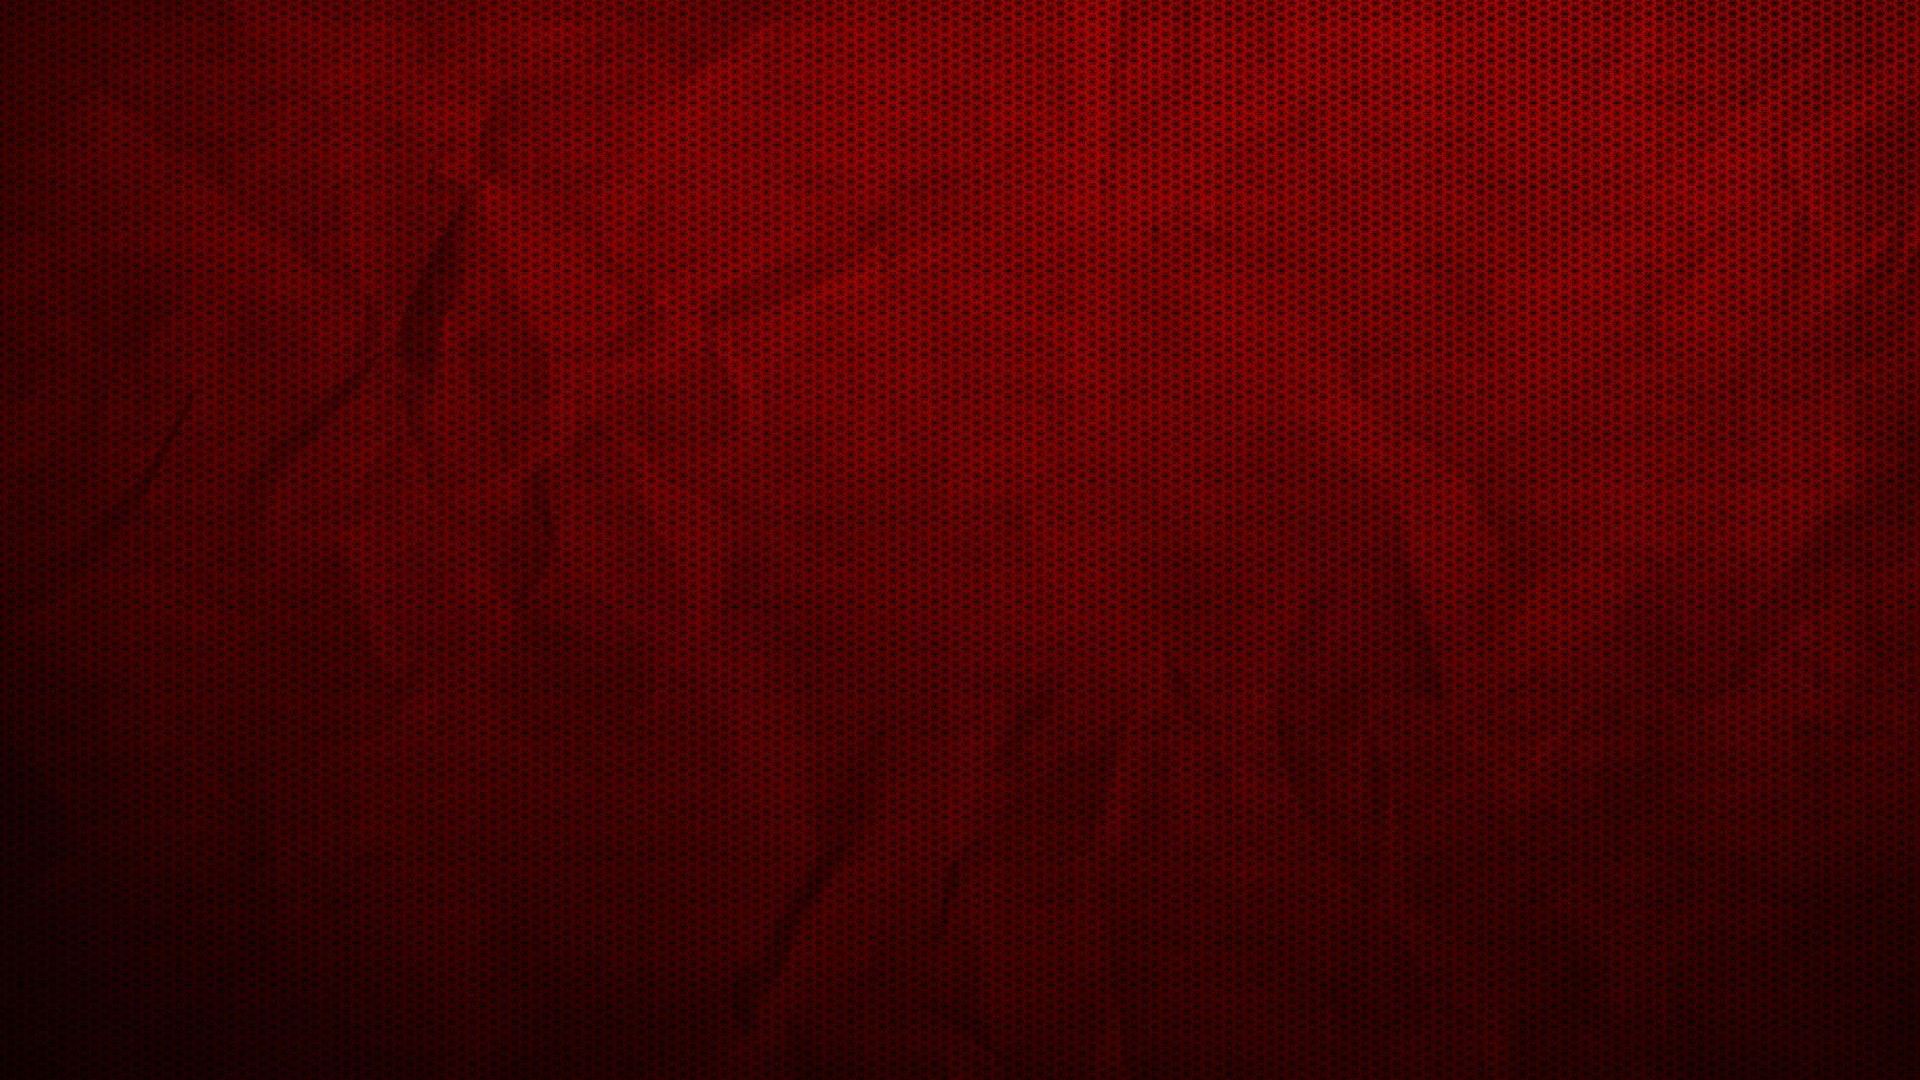 A red paper texture background with some wrinkles - Dark red